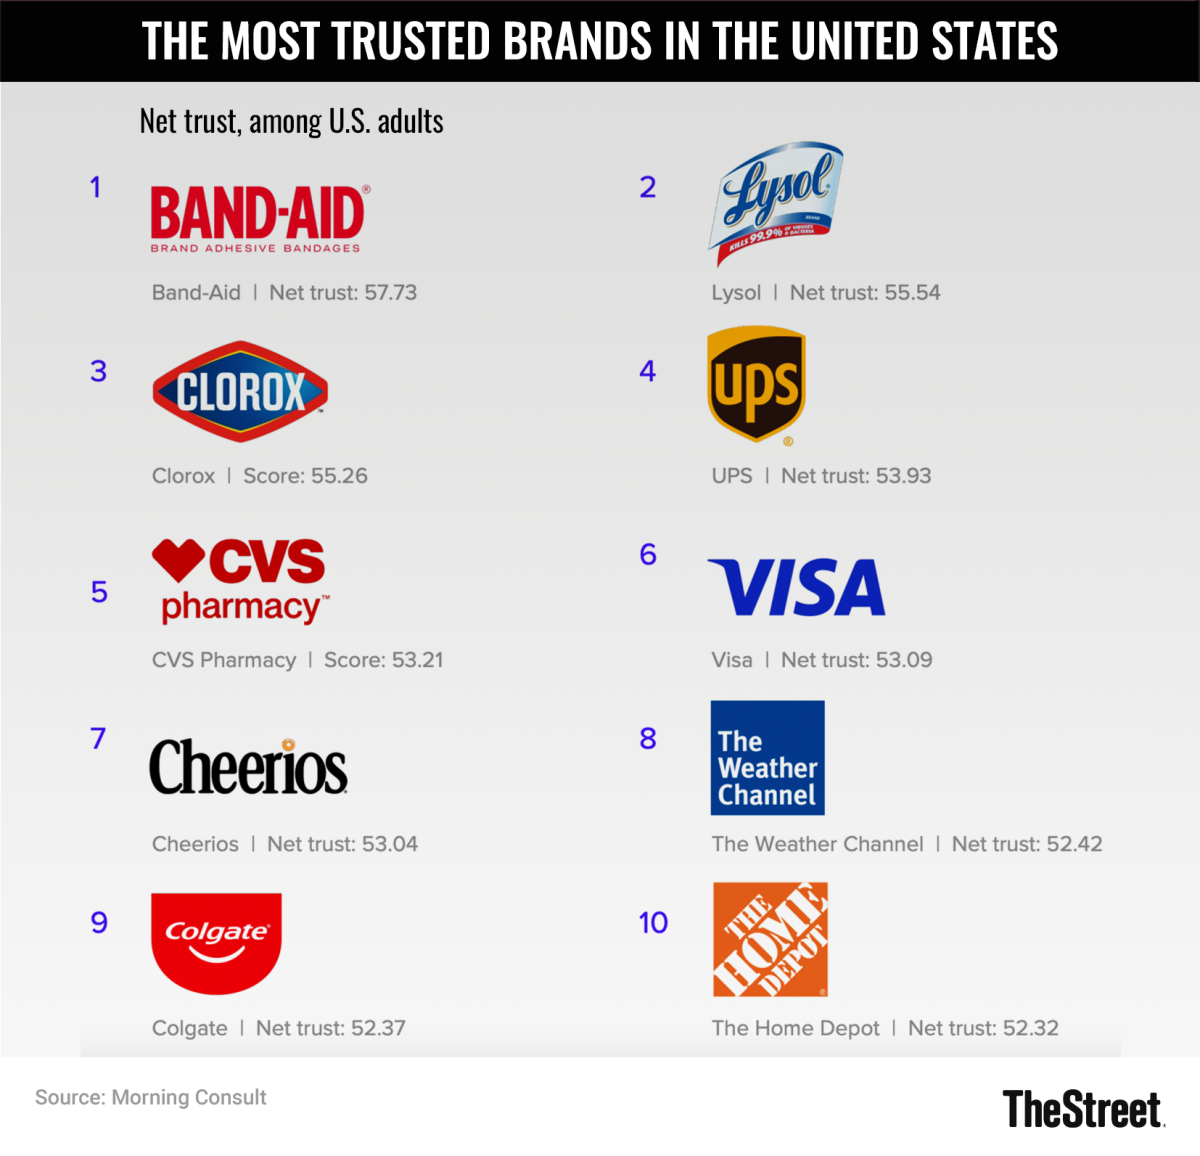 trusted travel brands